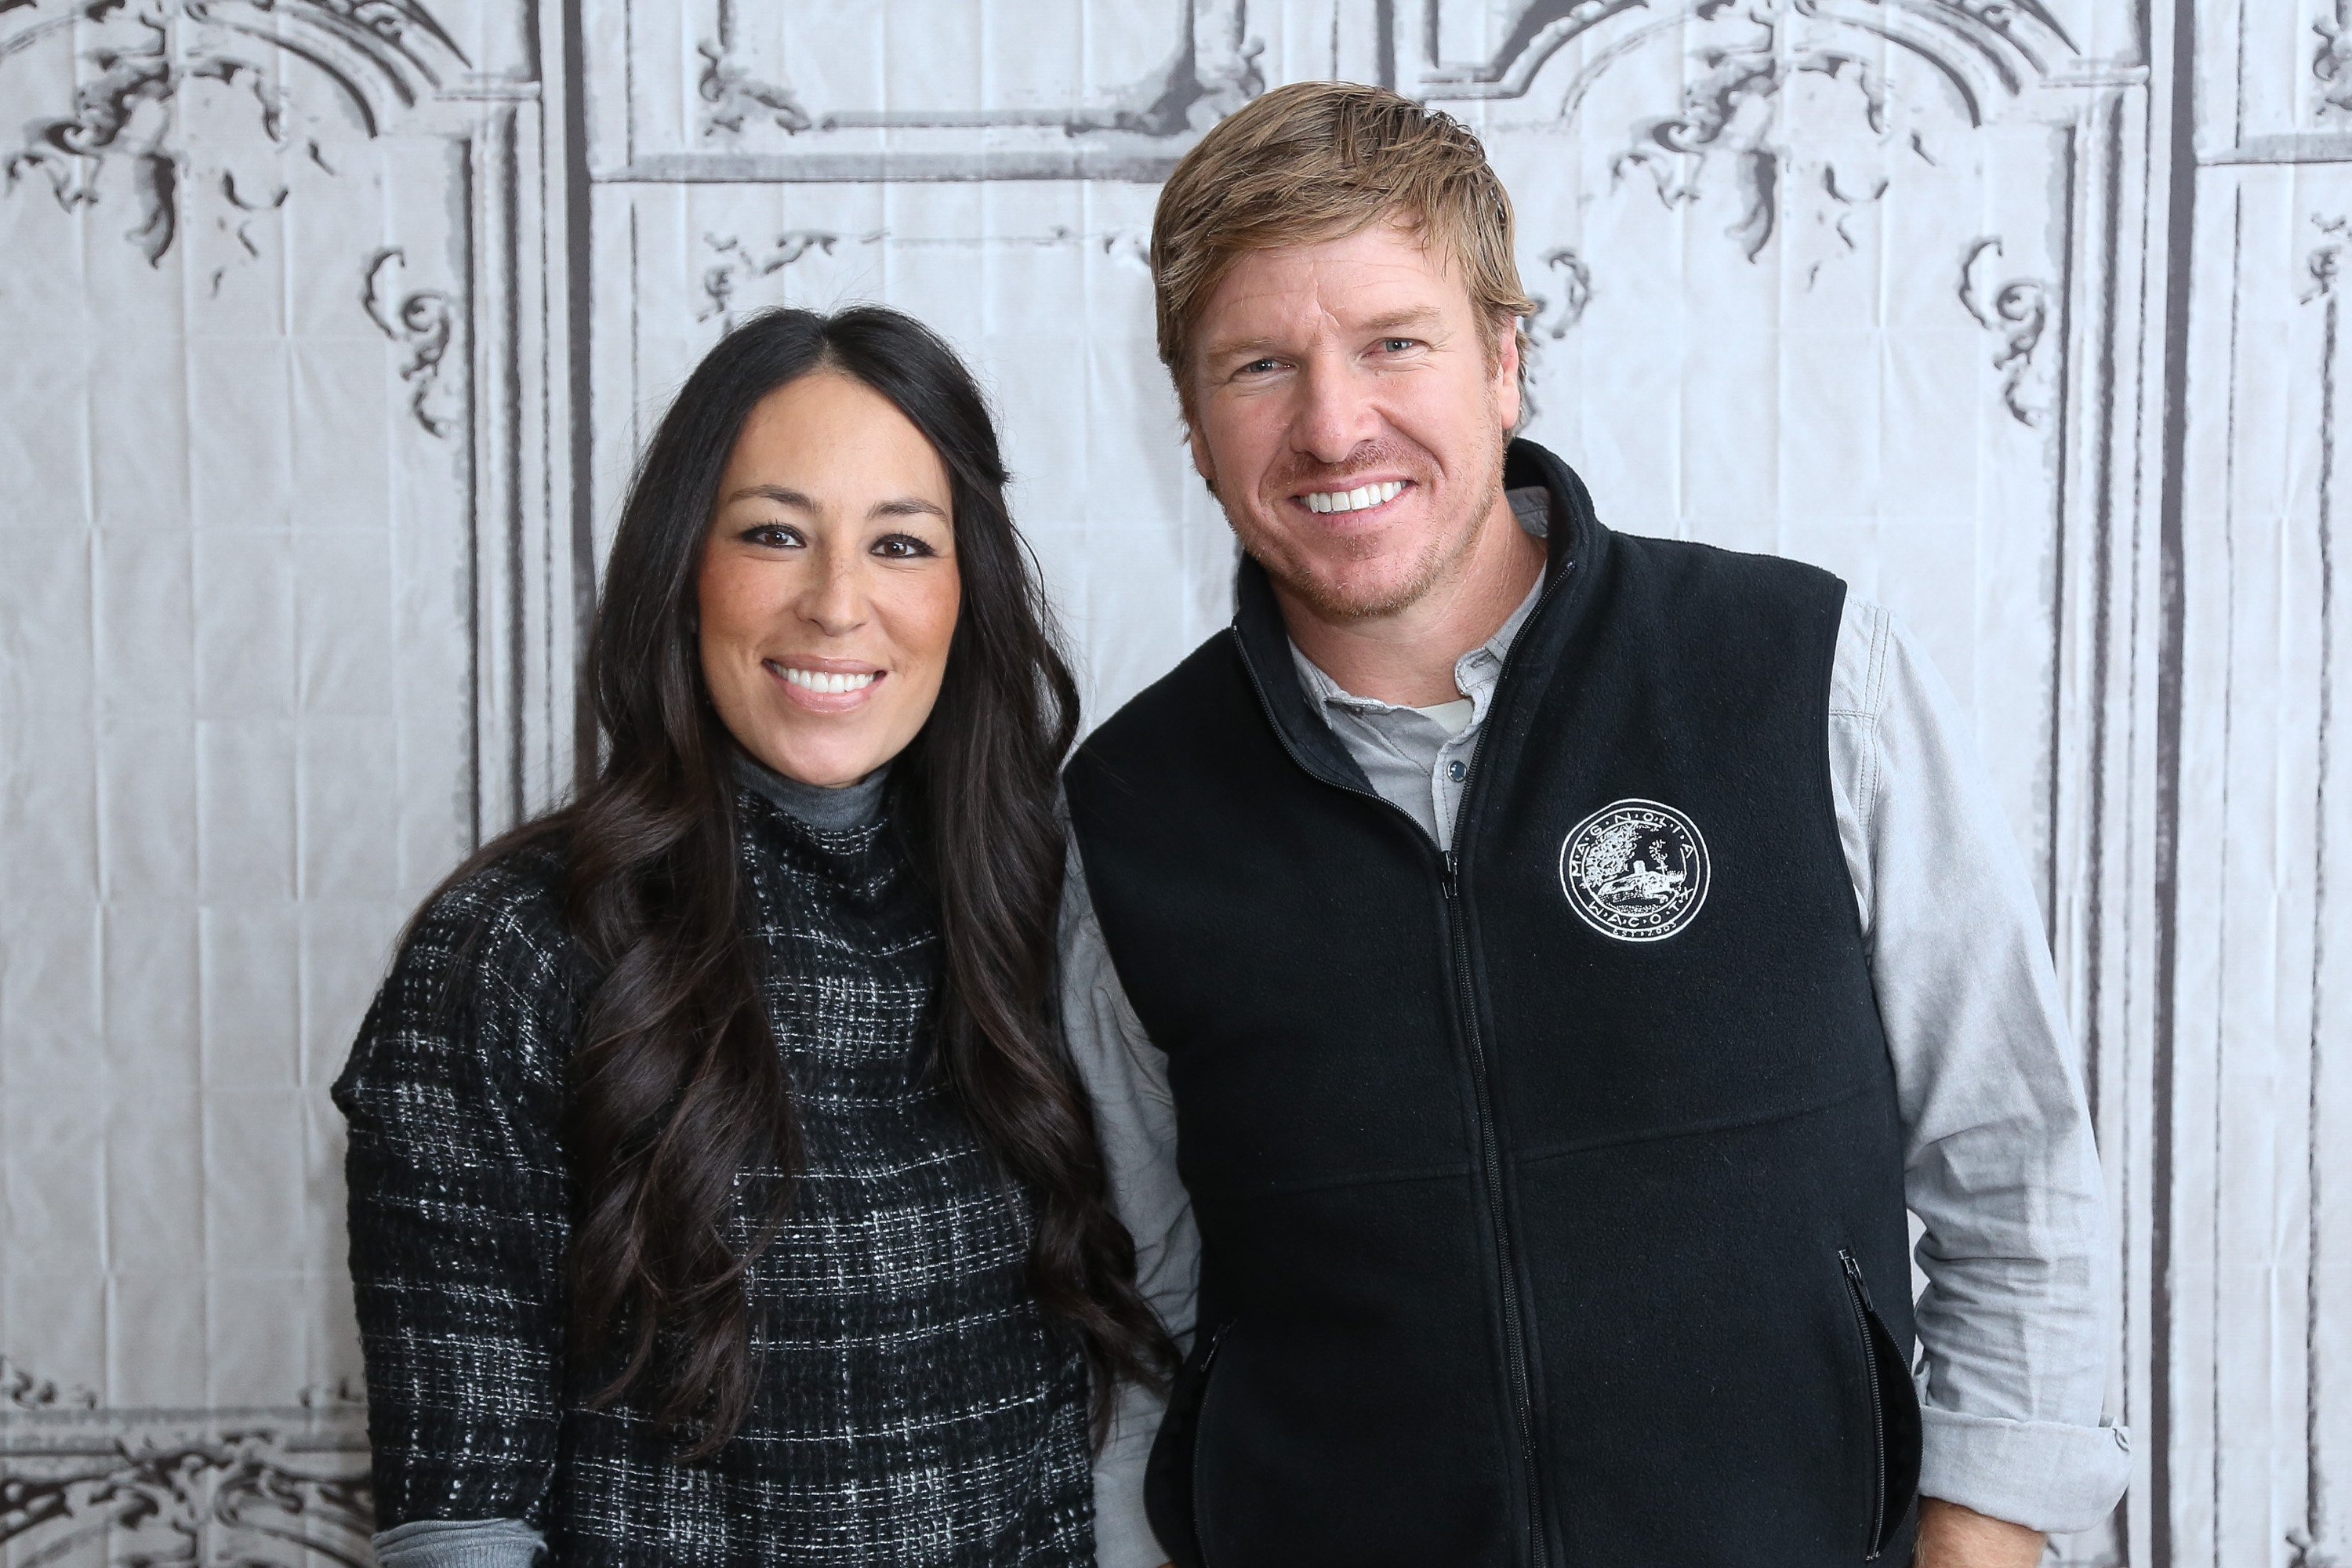 Joanna and Chip Gaines at the AOL Build Presents Fixer Upper at AOL Studios In New York on December 8, 2015 | Photo: Getty Images